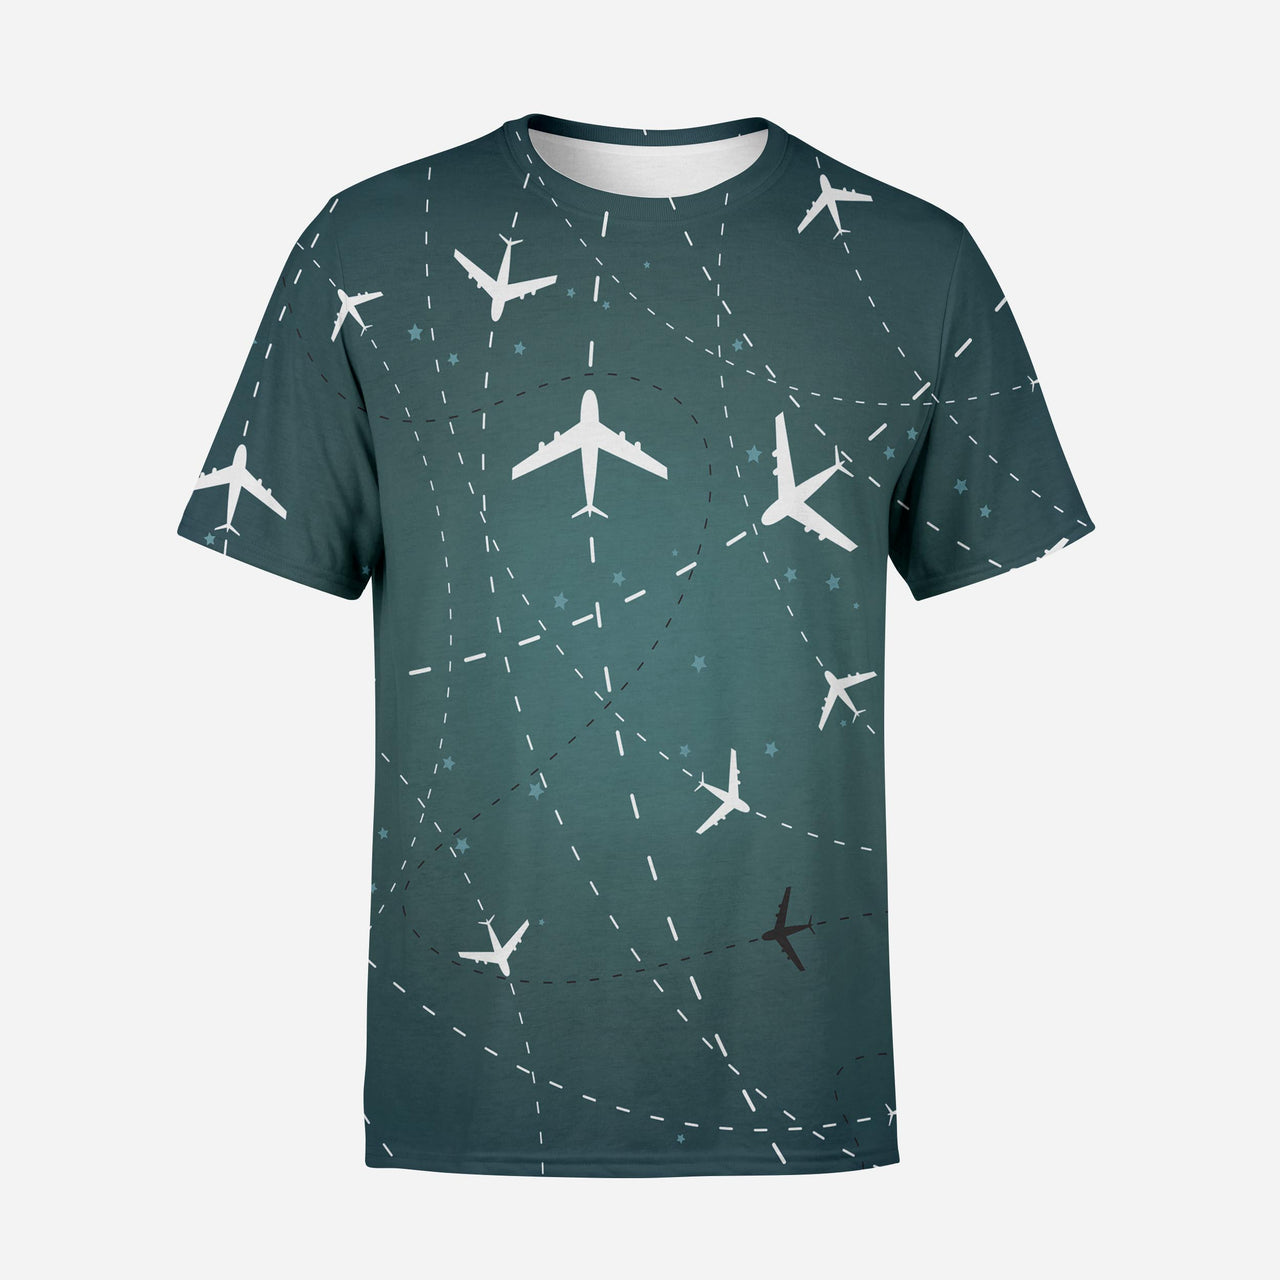 Travelling with Aircraft (Green) Designed 3D T-Shirts